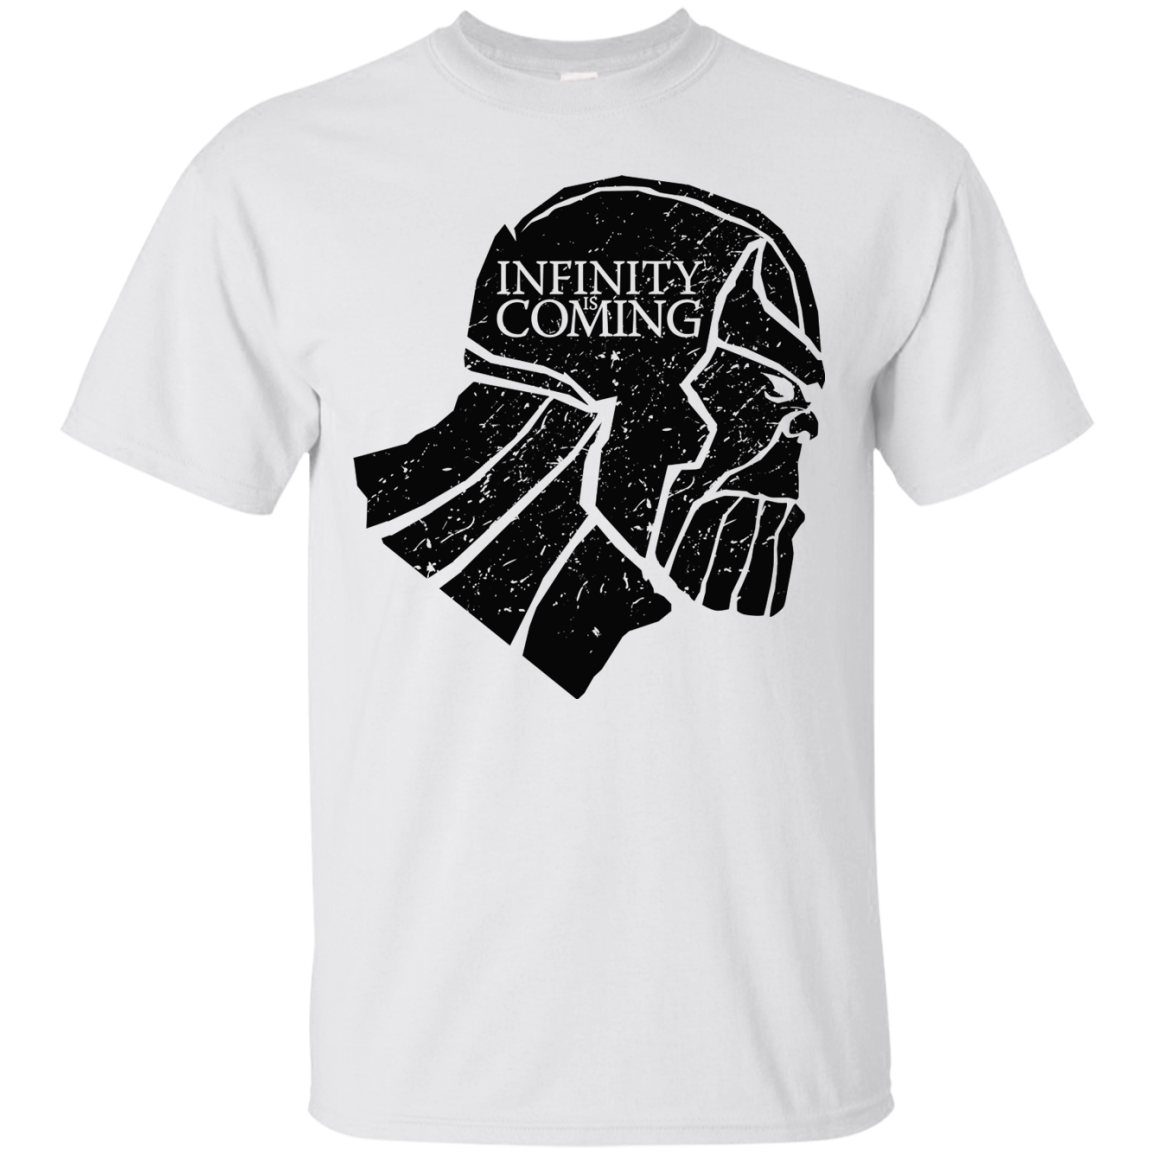 Infinity is coming T-Shirt